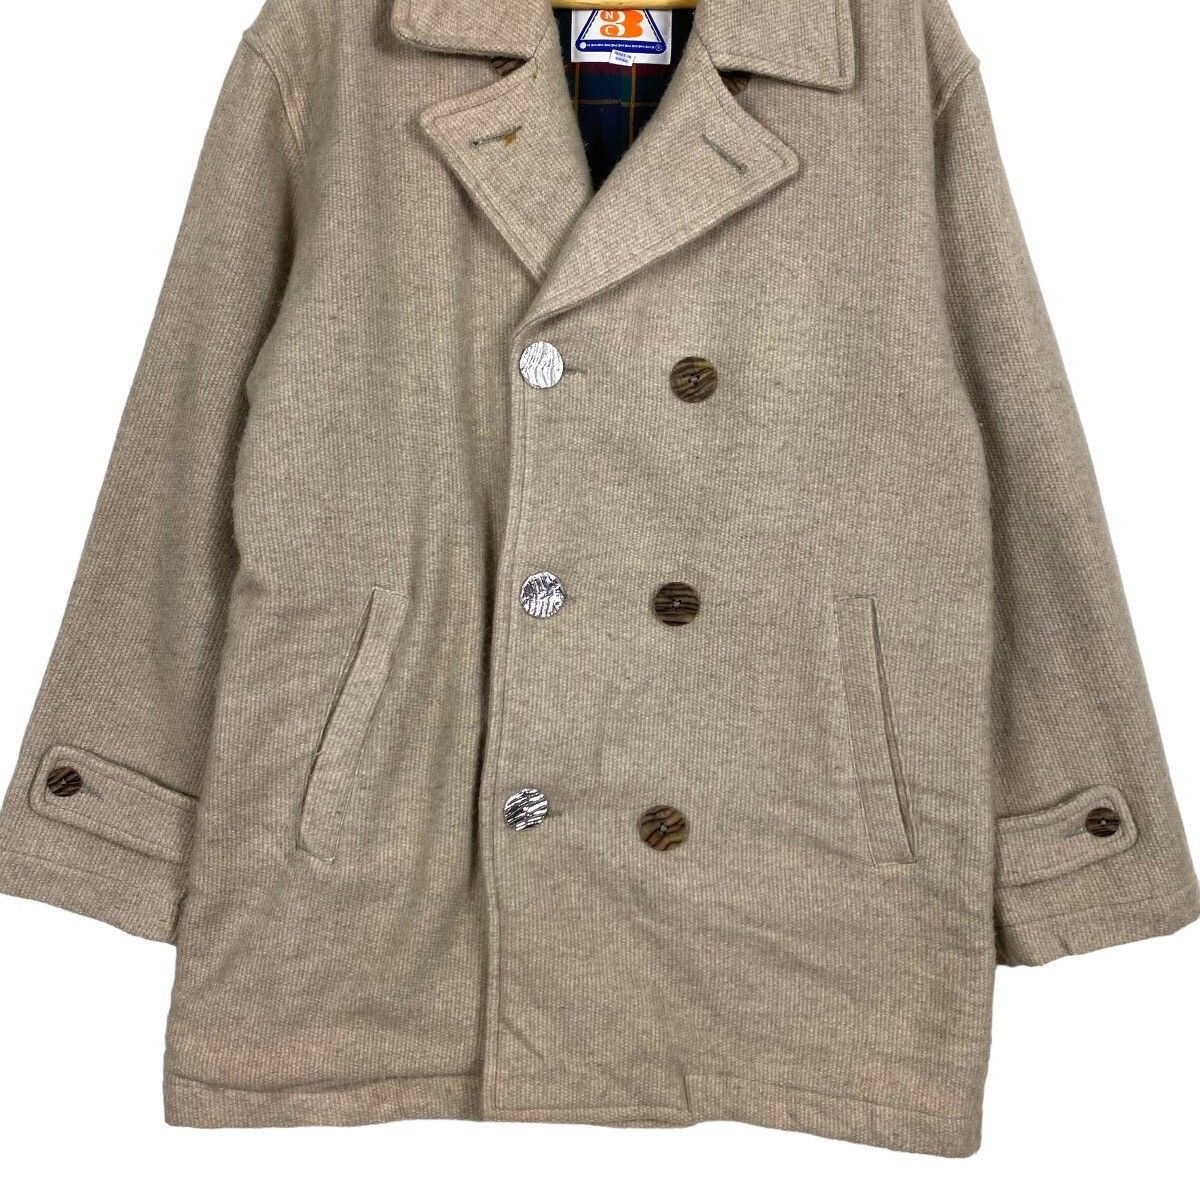 Nigel Cabourn Button Jacket Made In Japan - 5